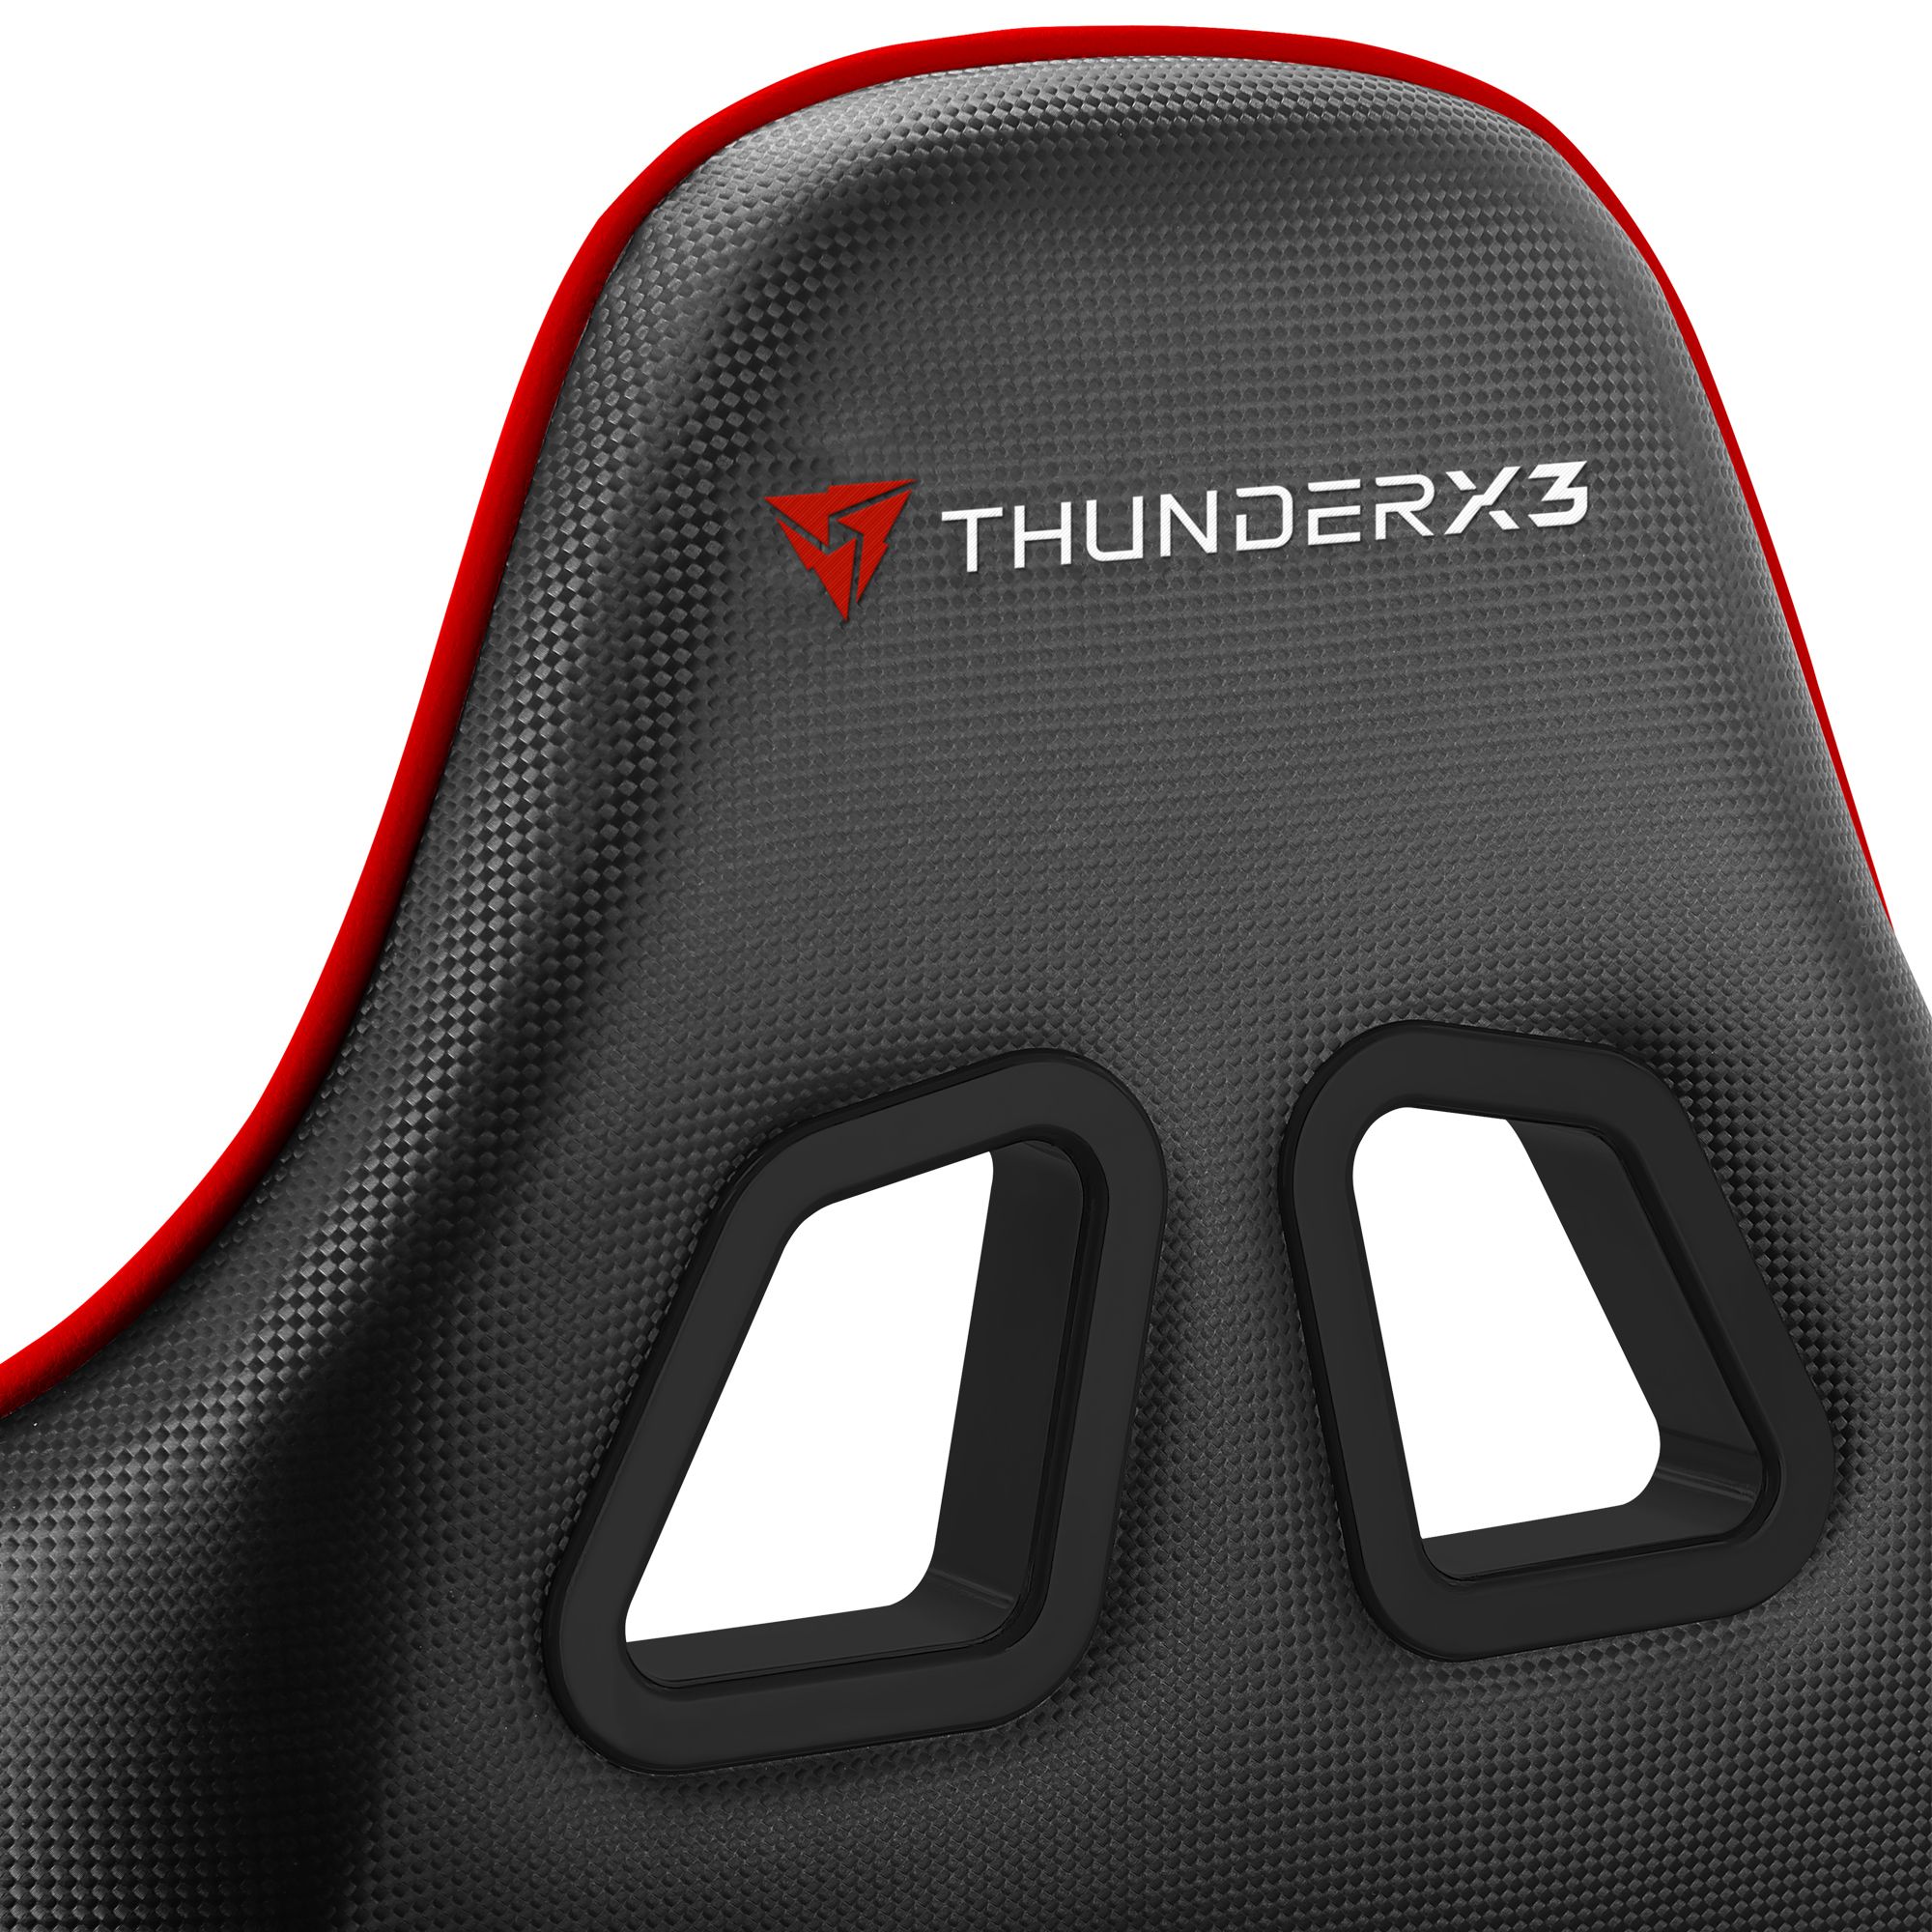 ThunderX3 EC3BR video game chair PC gaming chair Padded seat Black, Red_6